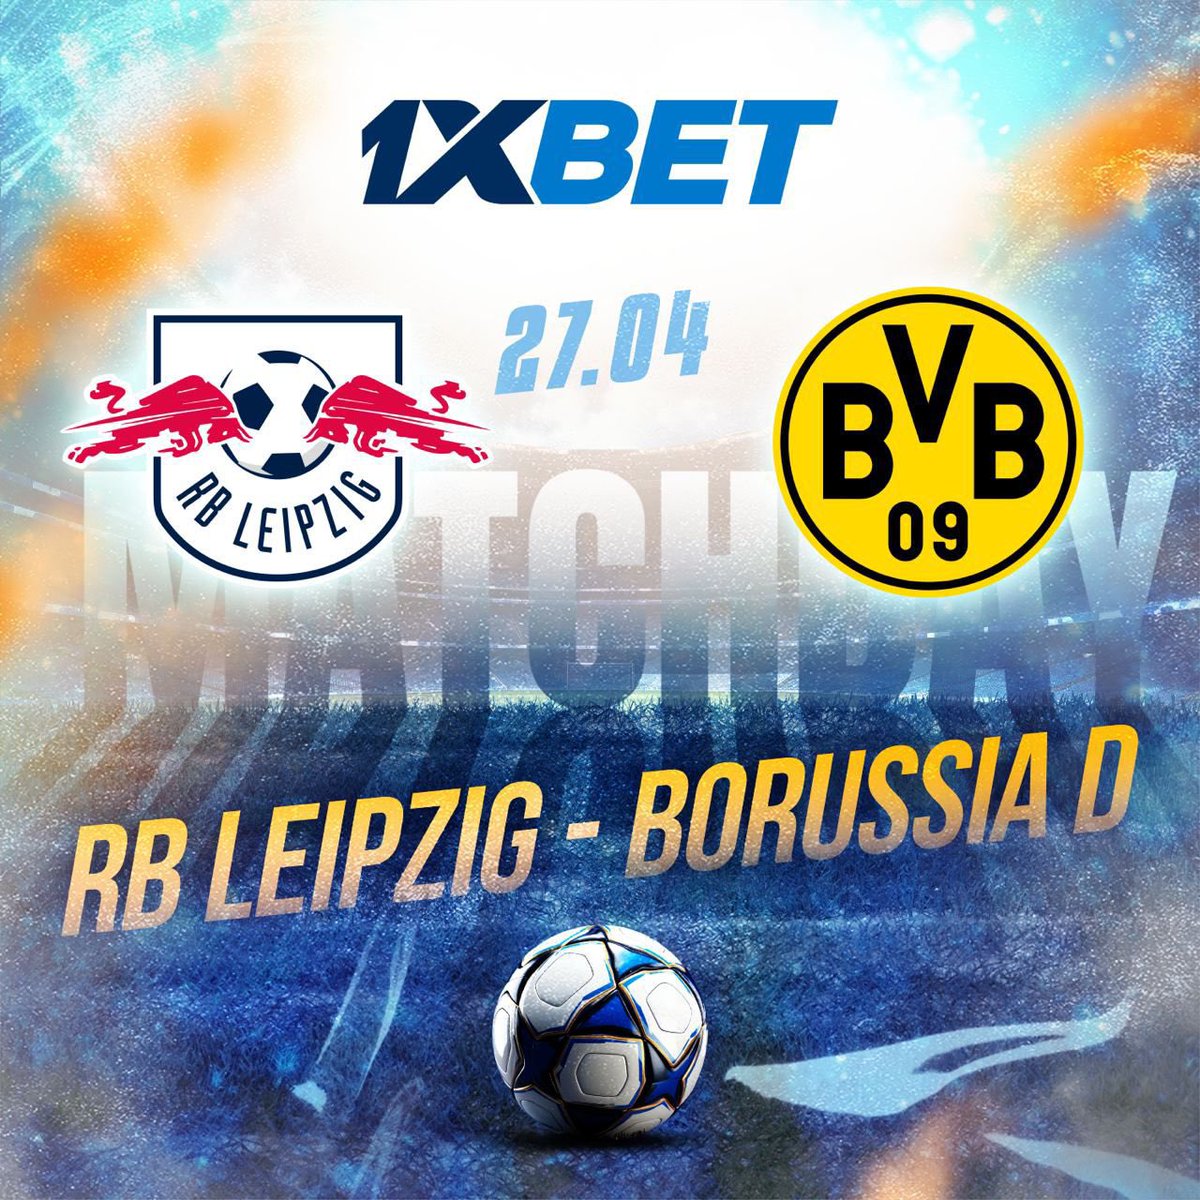 Who do you think will win Leipzig or Dortmund? Get $100 free bonus on your first deposit on 1xBet & $70 bonus if your first game cut! Step 1: Sign Up with the link bit.ly/3TTWl9e Step 2: Use my Promo code “YOBRXXZY” Step 3: Stake with what you can afford